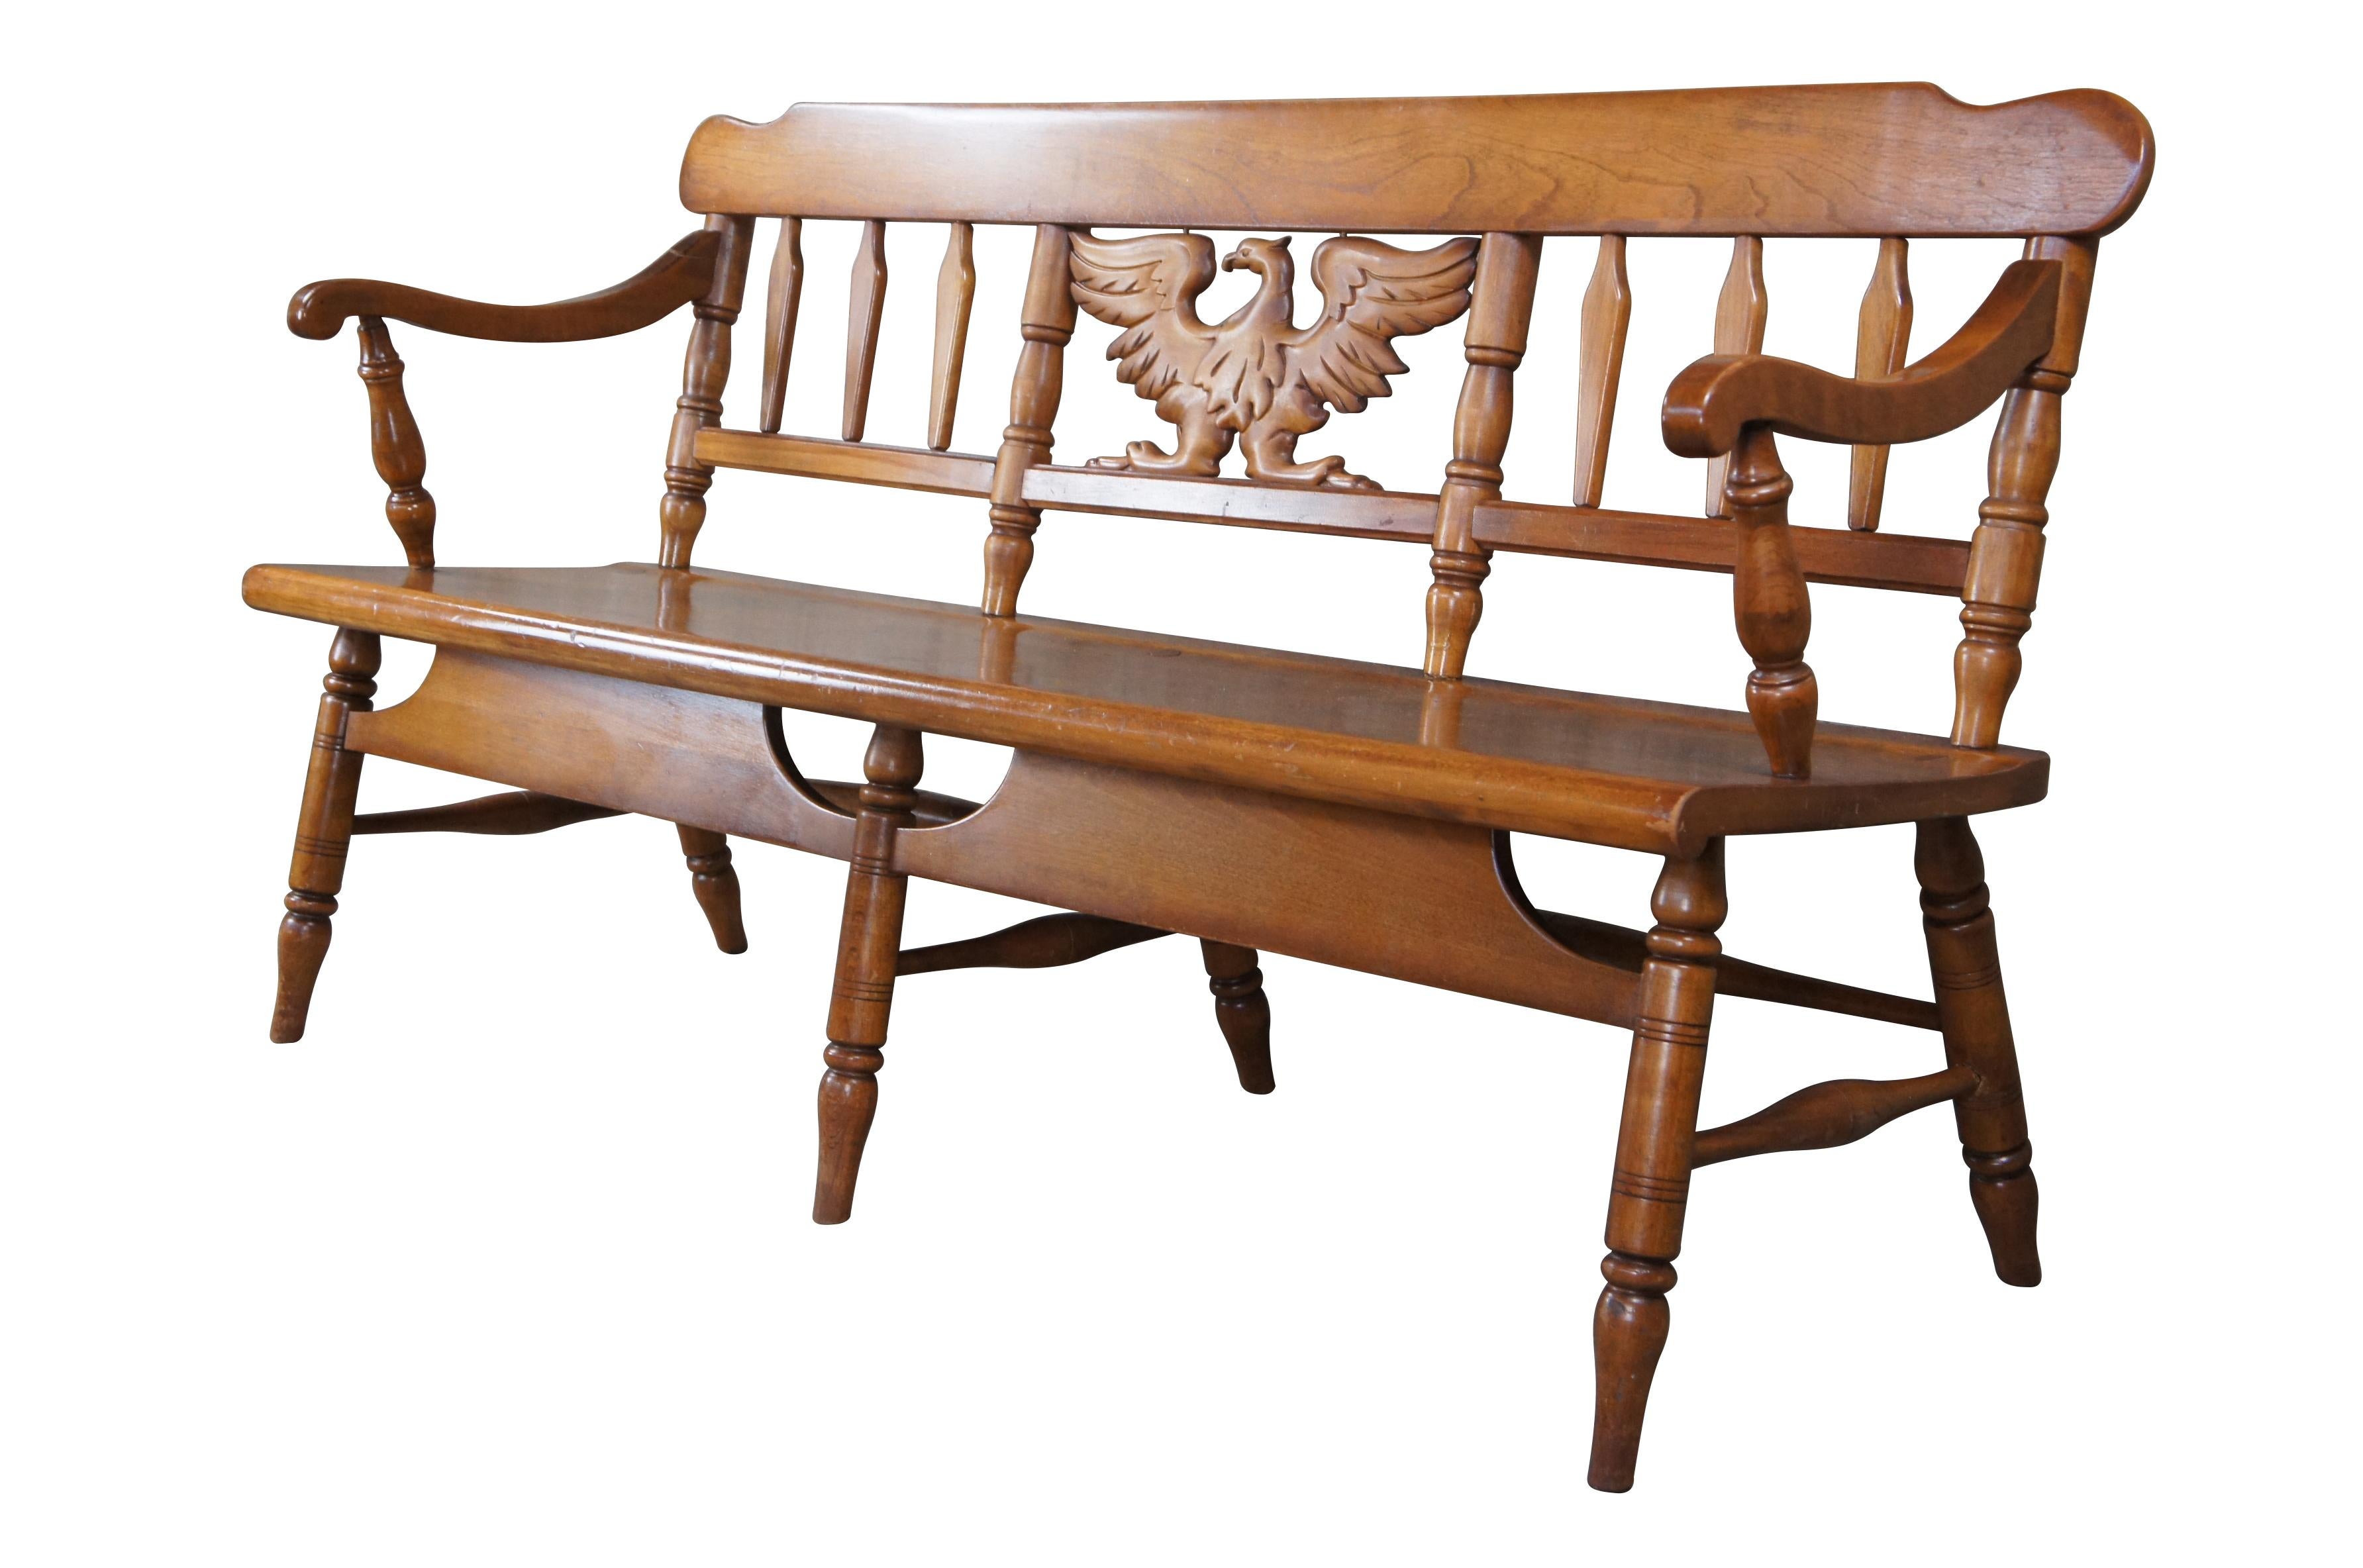 Vintage Cushman Colonial Creations settee bench.  Made of maple featuring slatted back with sloped arms and carved eagle.  # 6031.

The H.T. Cushman Manufacturing Company was founded in 1886 and spent close to 100 years building furniture in